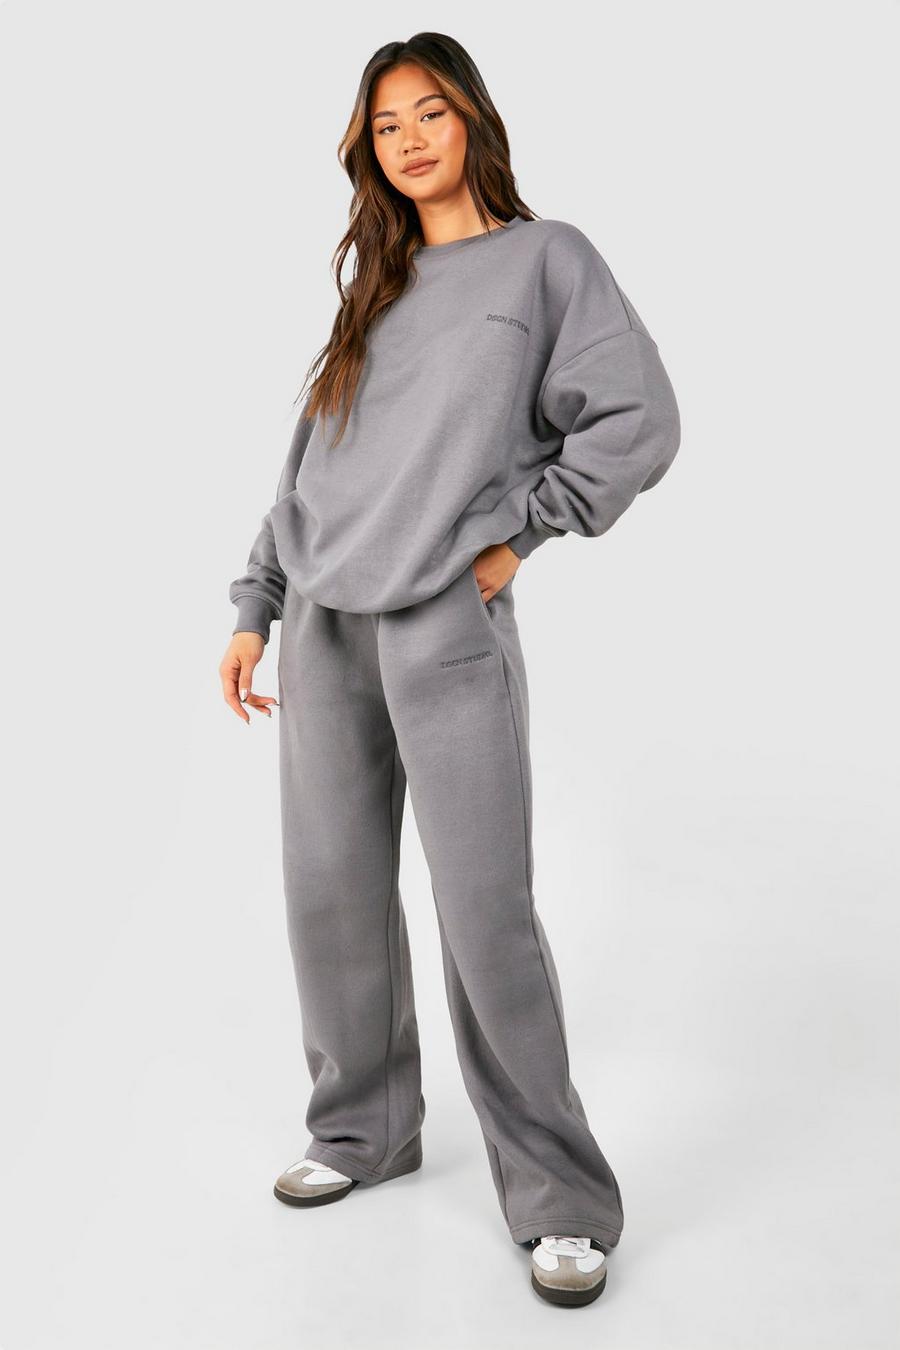 Charcoal DSGN Studio Embroidered Sweatshirt And Straight Leg Jogger Tracksuit 